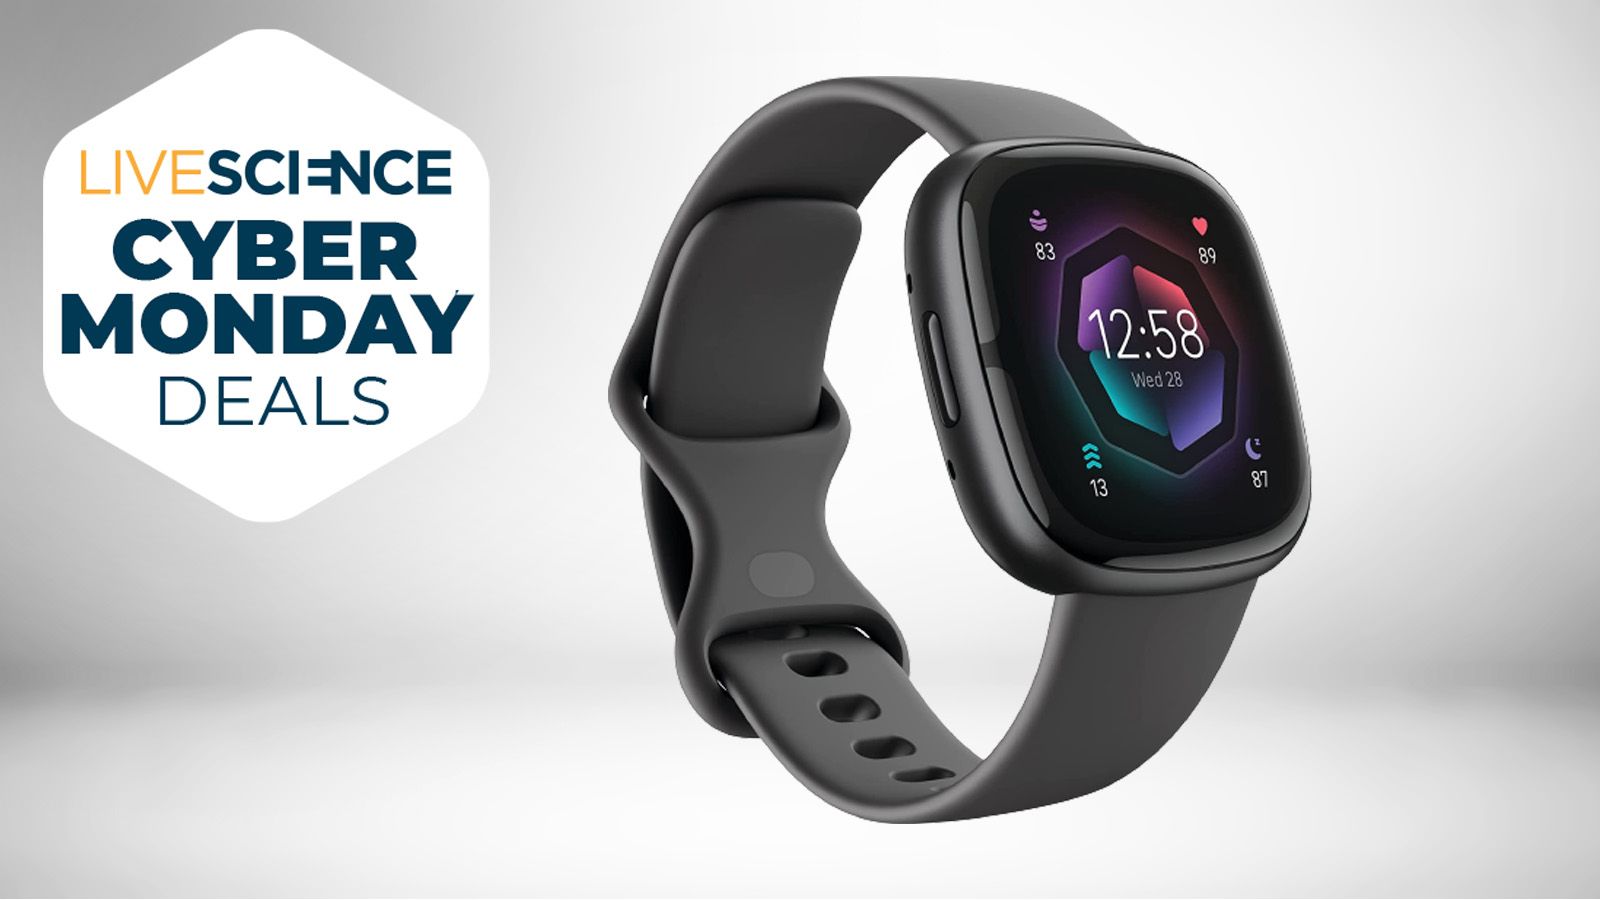 It's your last chance to get a 70 discount on Fitbit's best watch in